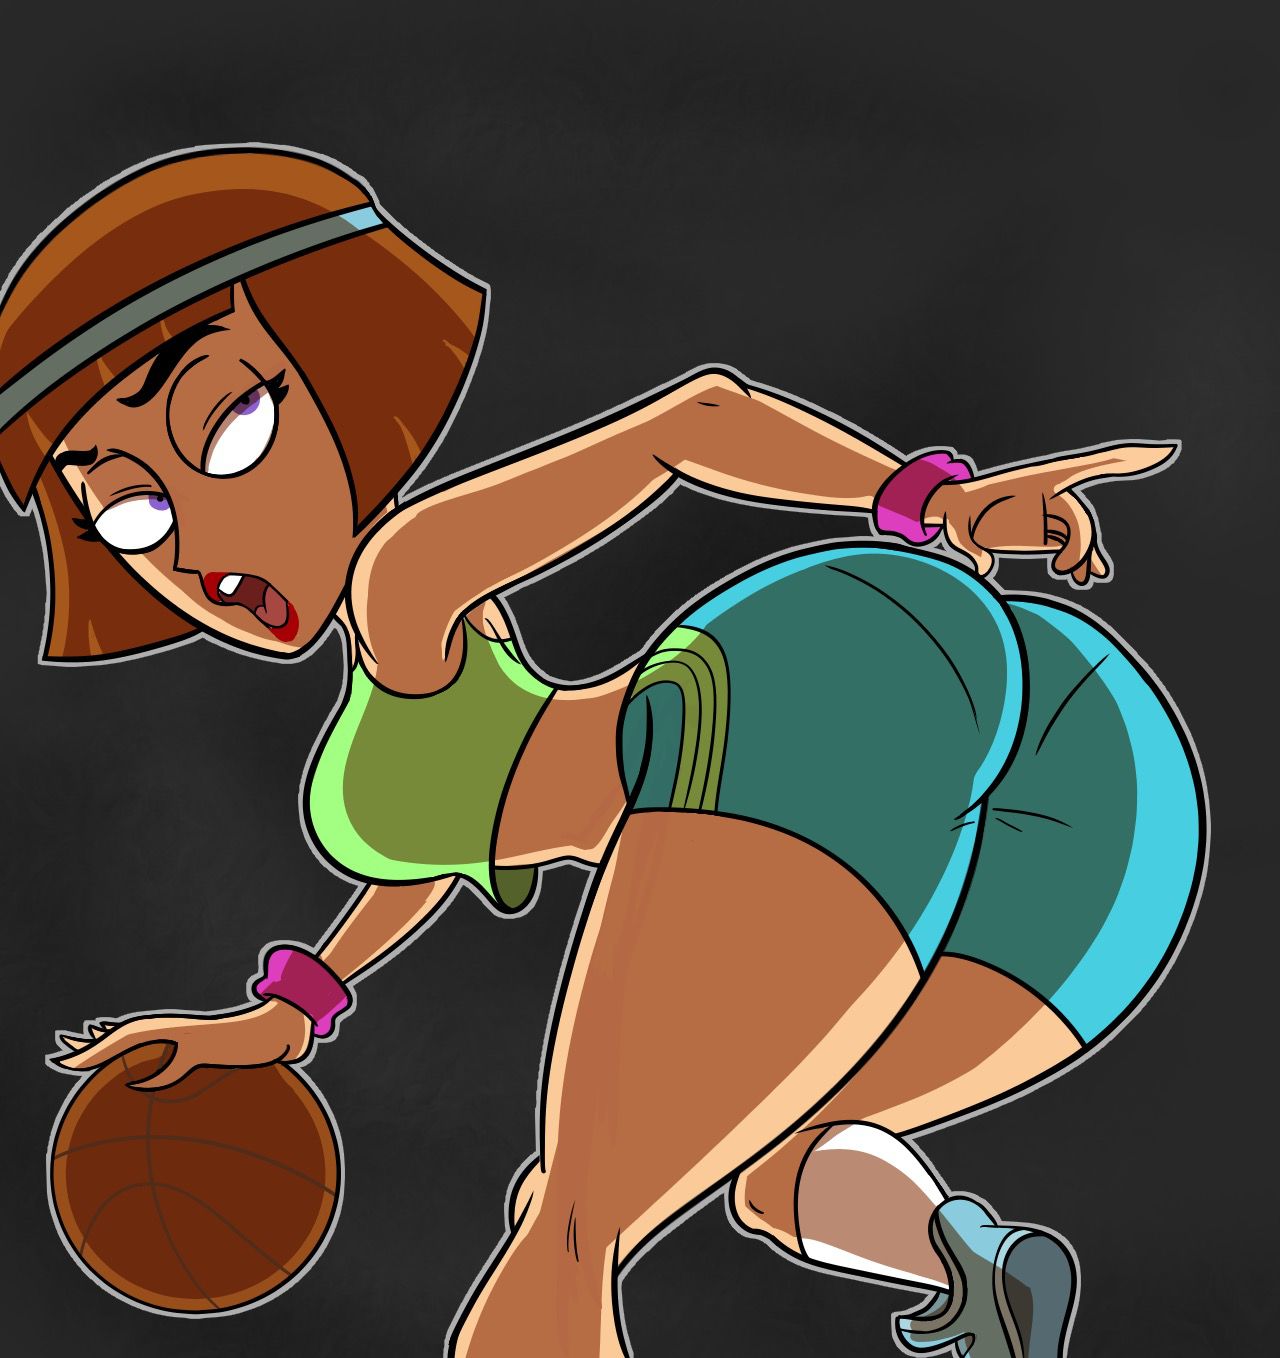 [Toxic Toons] Milfcercize pack 6